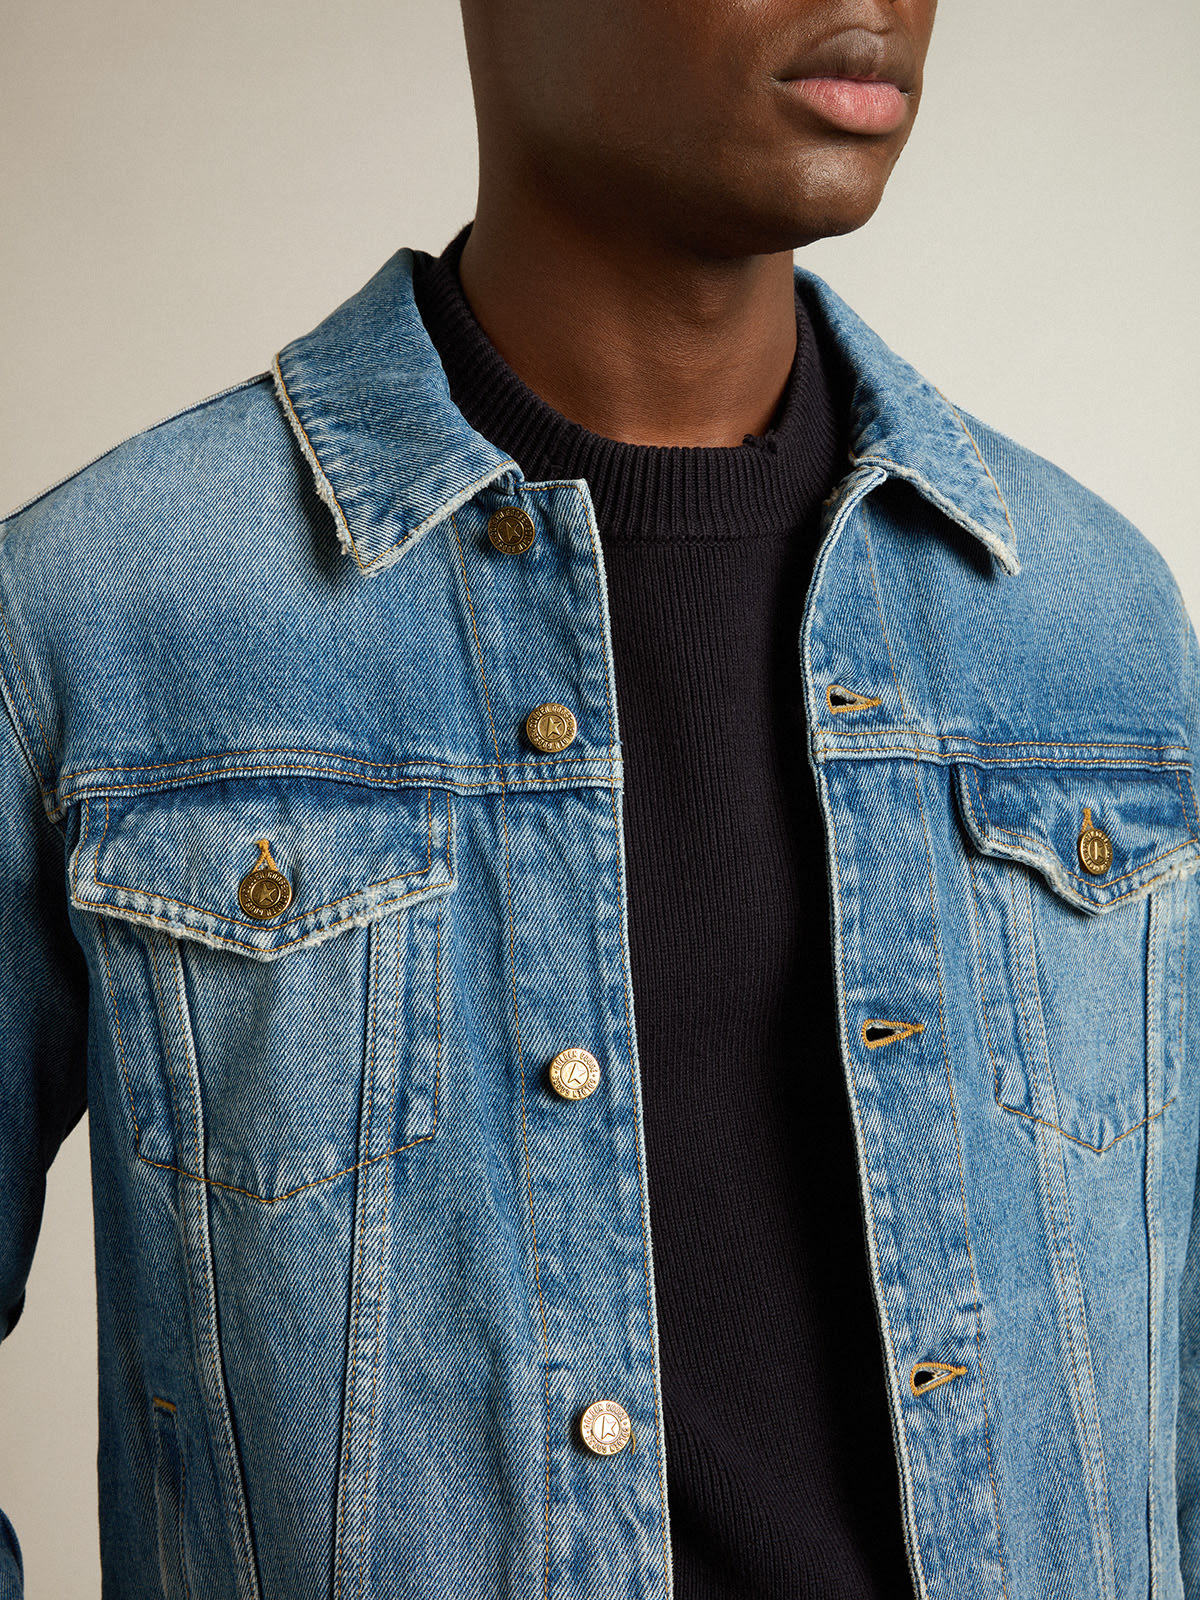 Golden Goose - Mid-wash denim jacket with a distressed treatment in 